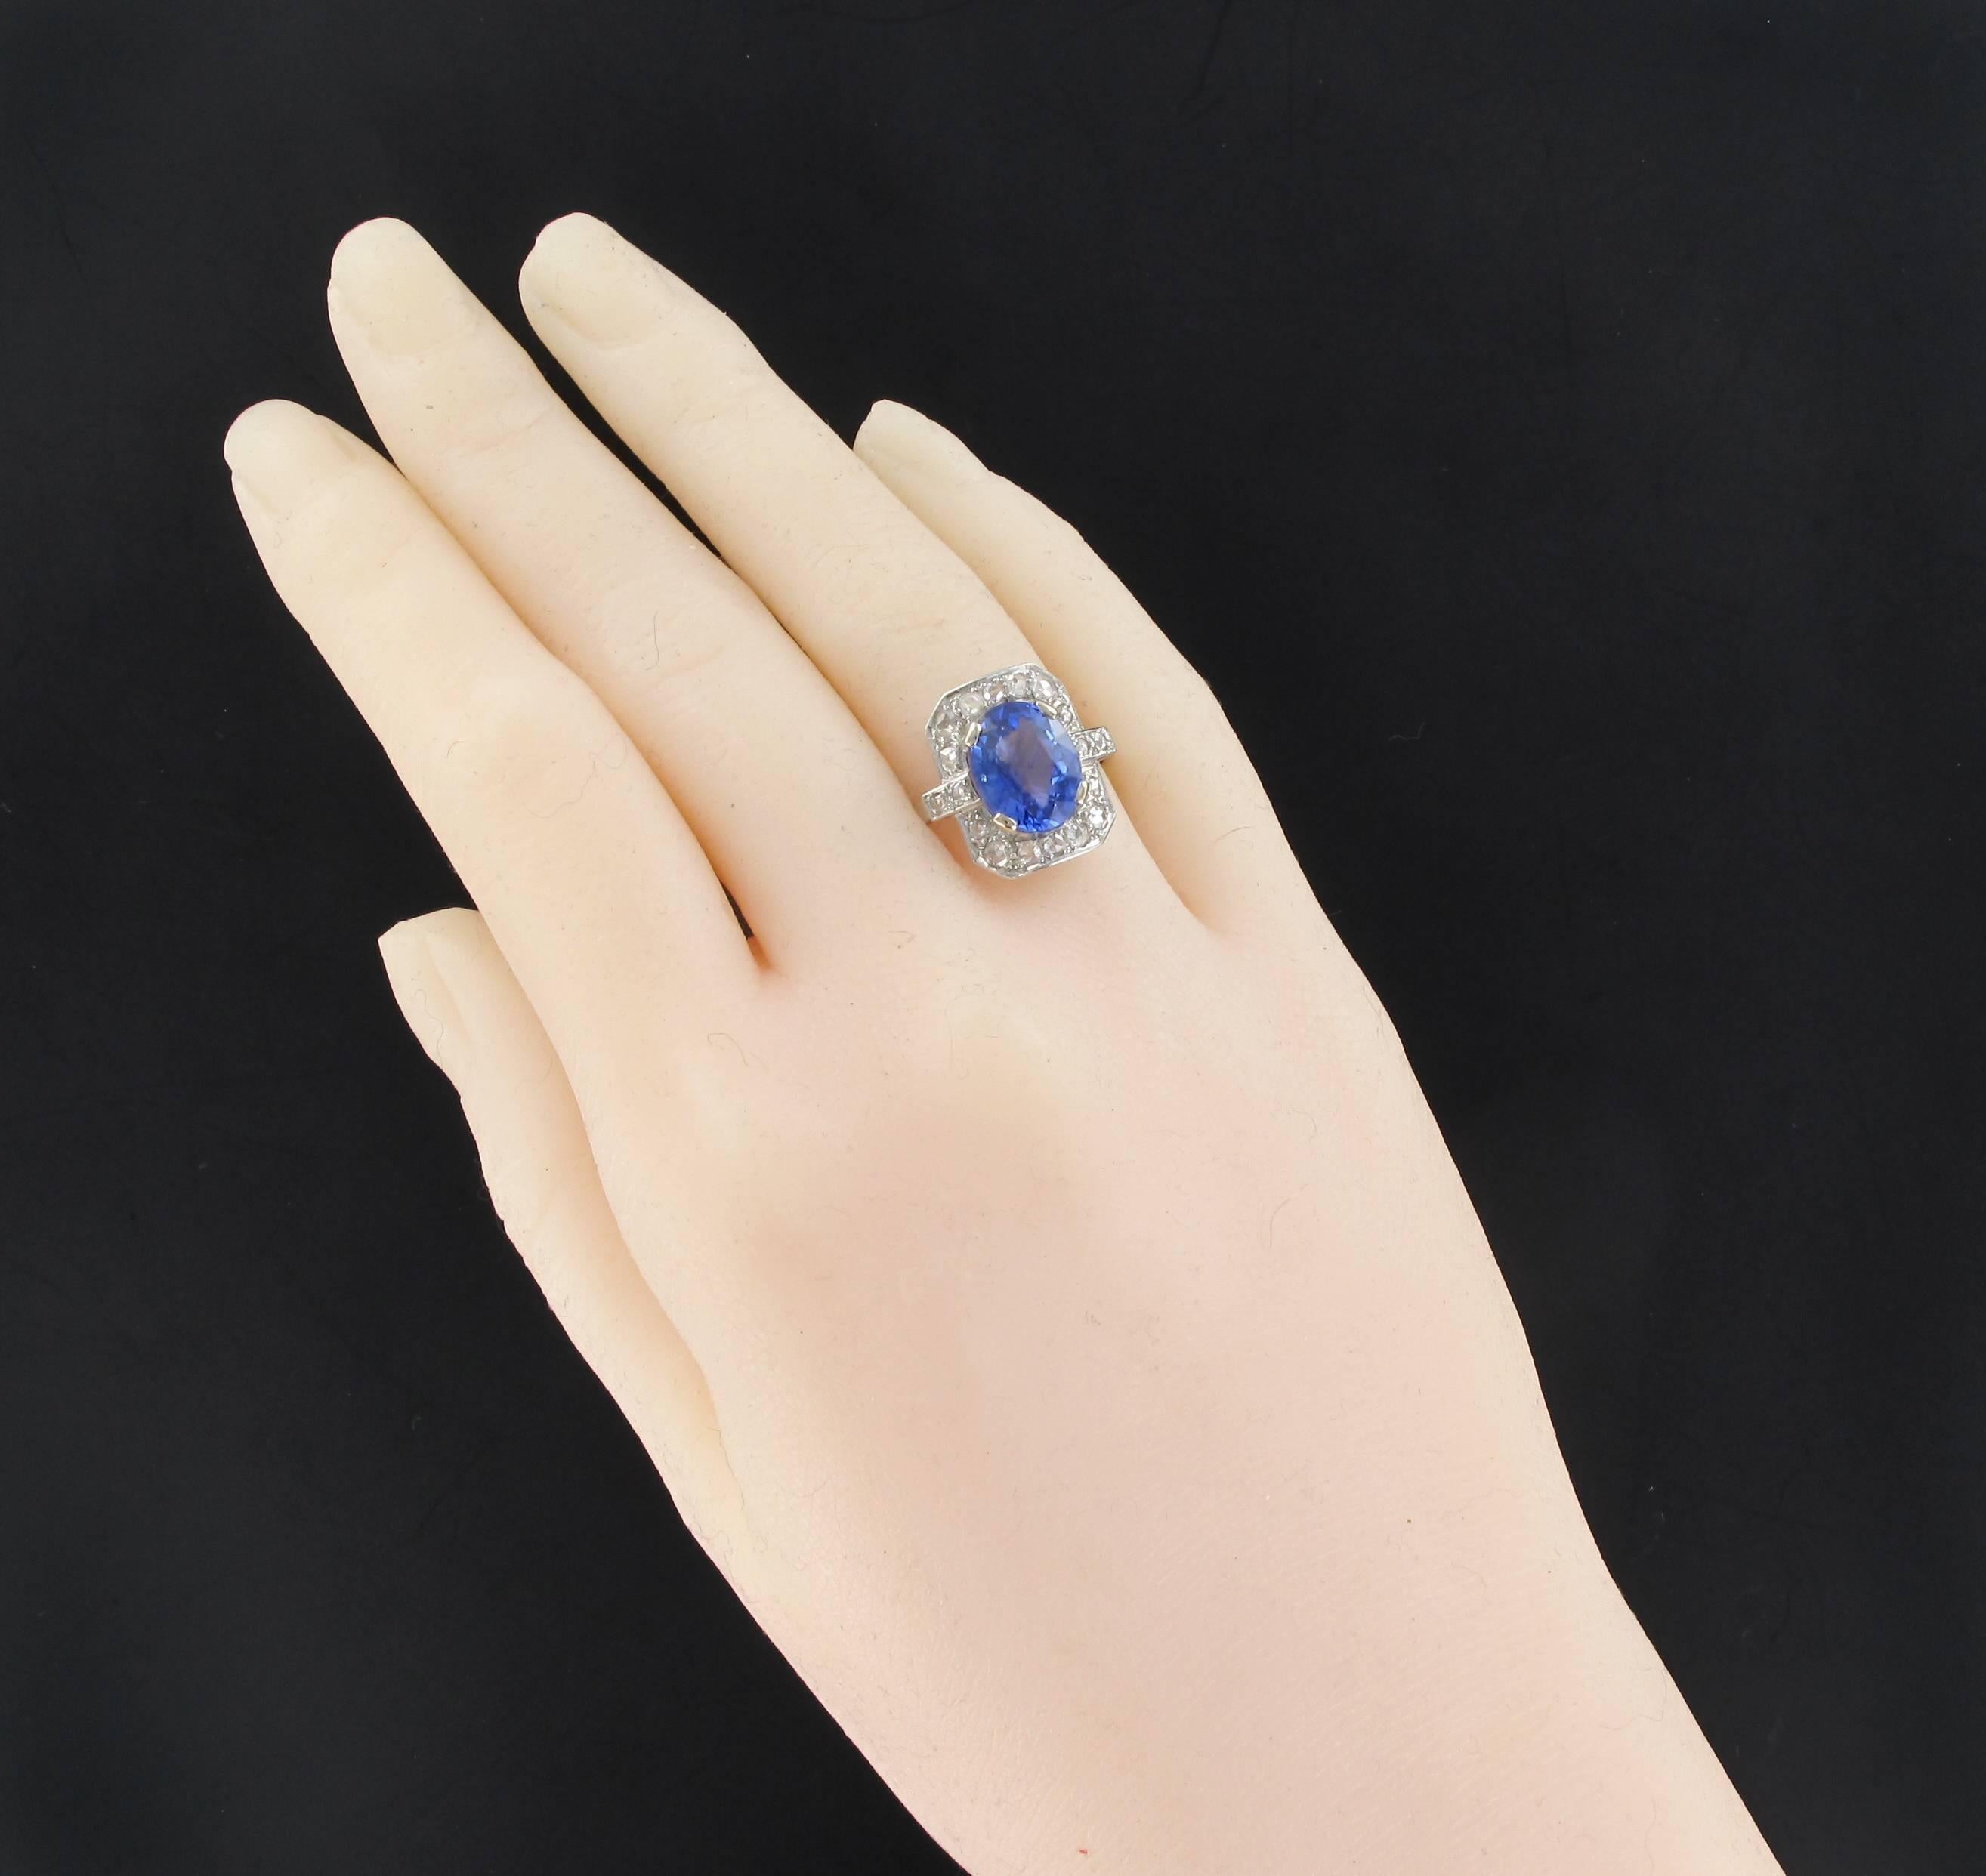 Ring in platinum, dog's head hallmark and 18 carats white gold, eagle's head hallmark.
Sublime art deco ring, it is set with 4 flat claws of an oval Ceylon sapphire on a geometric decoration set with rose cut diamonds. On the departure of the ring 2